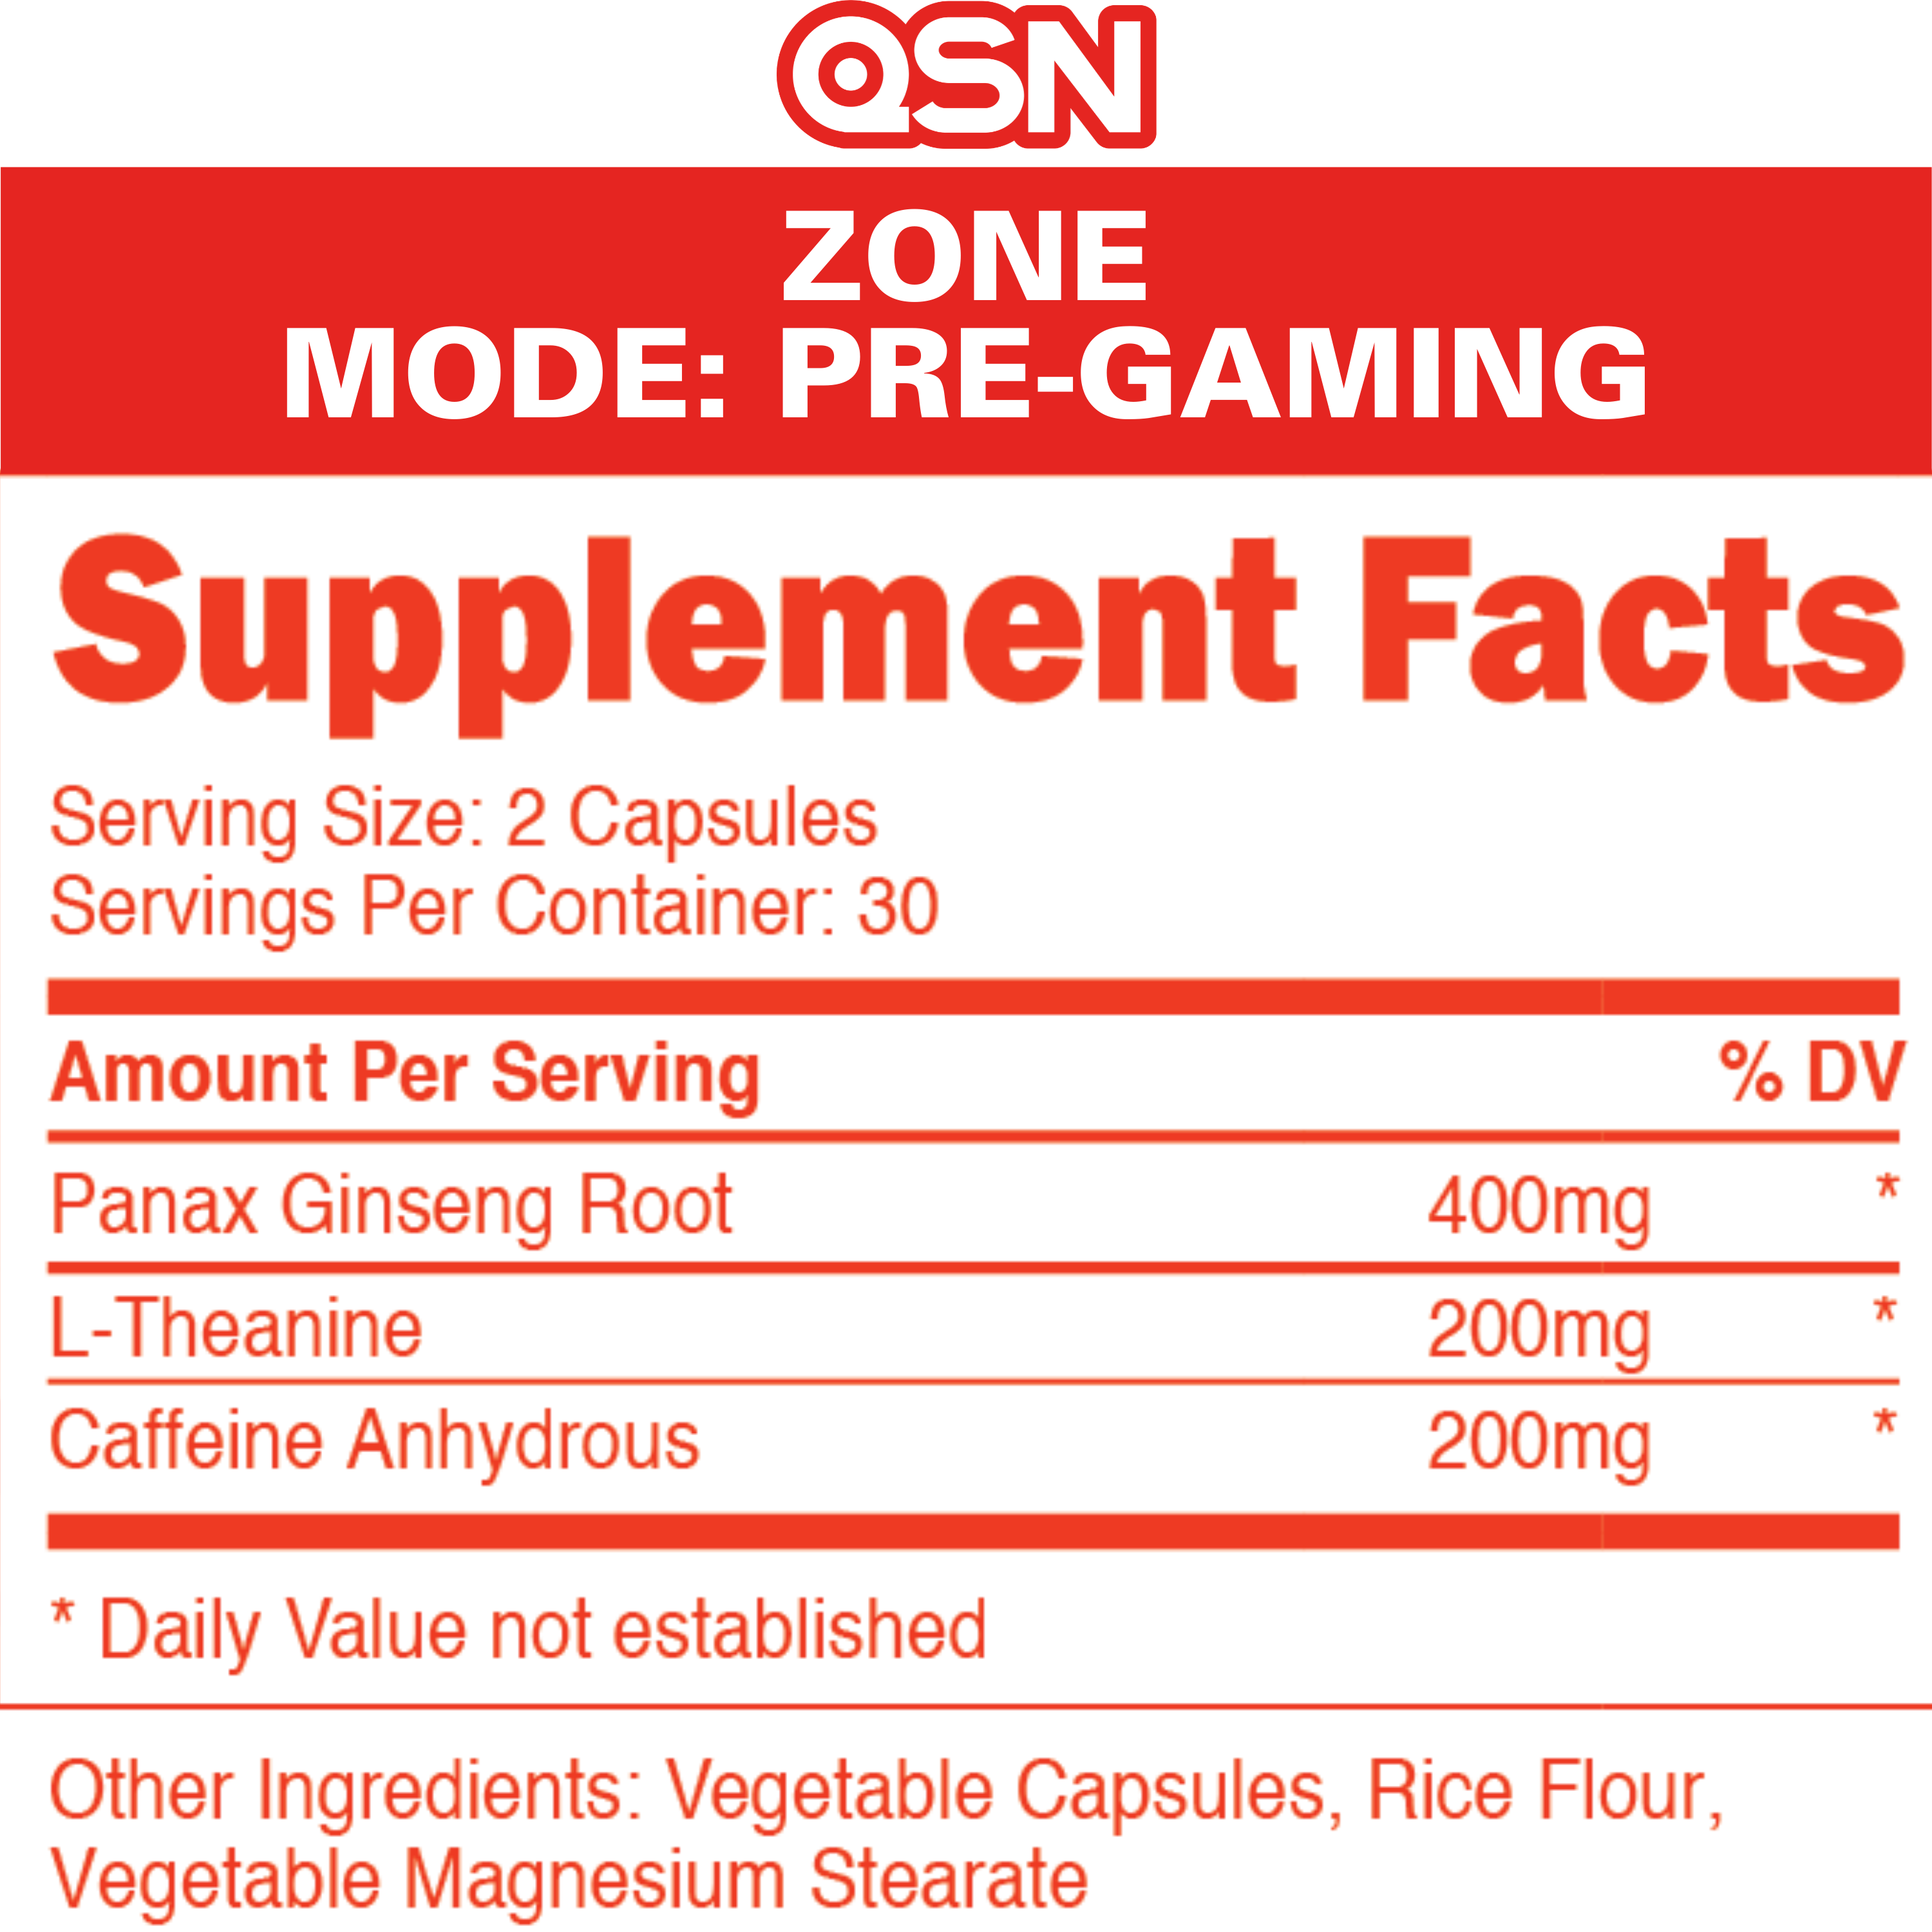 QSN Zone Supplement Facts